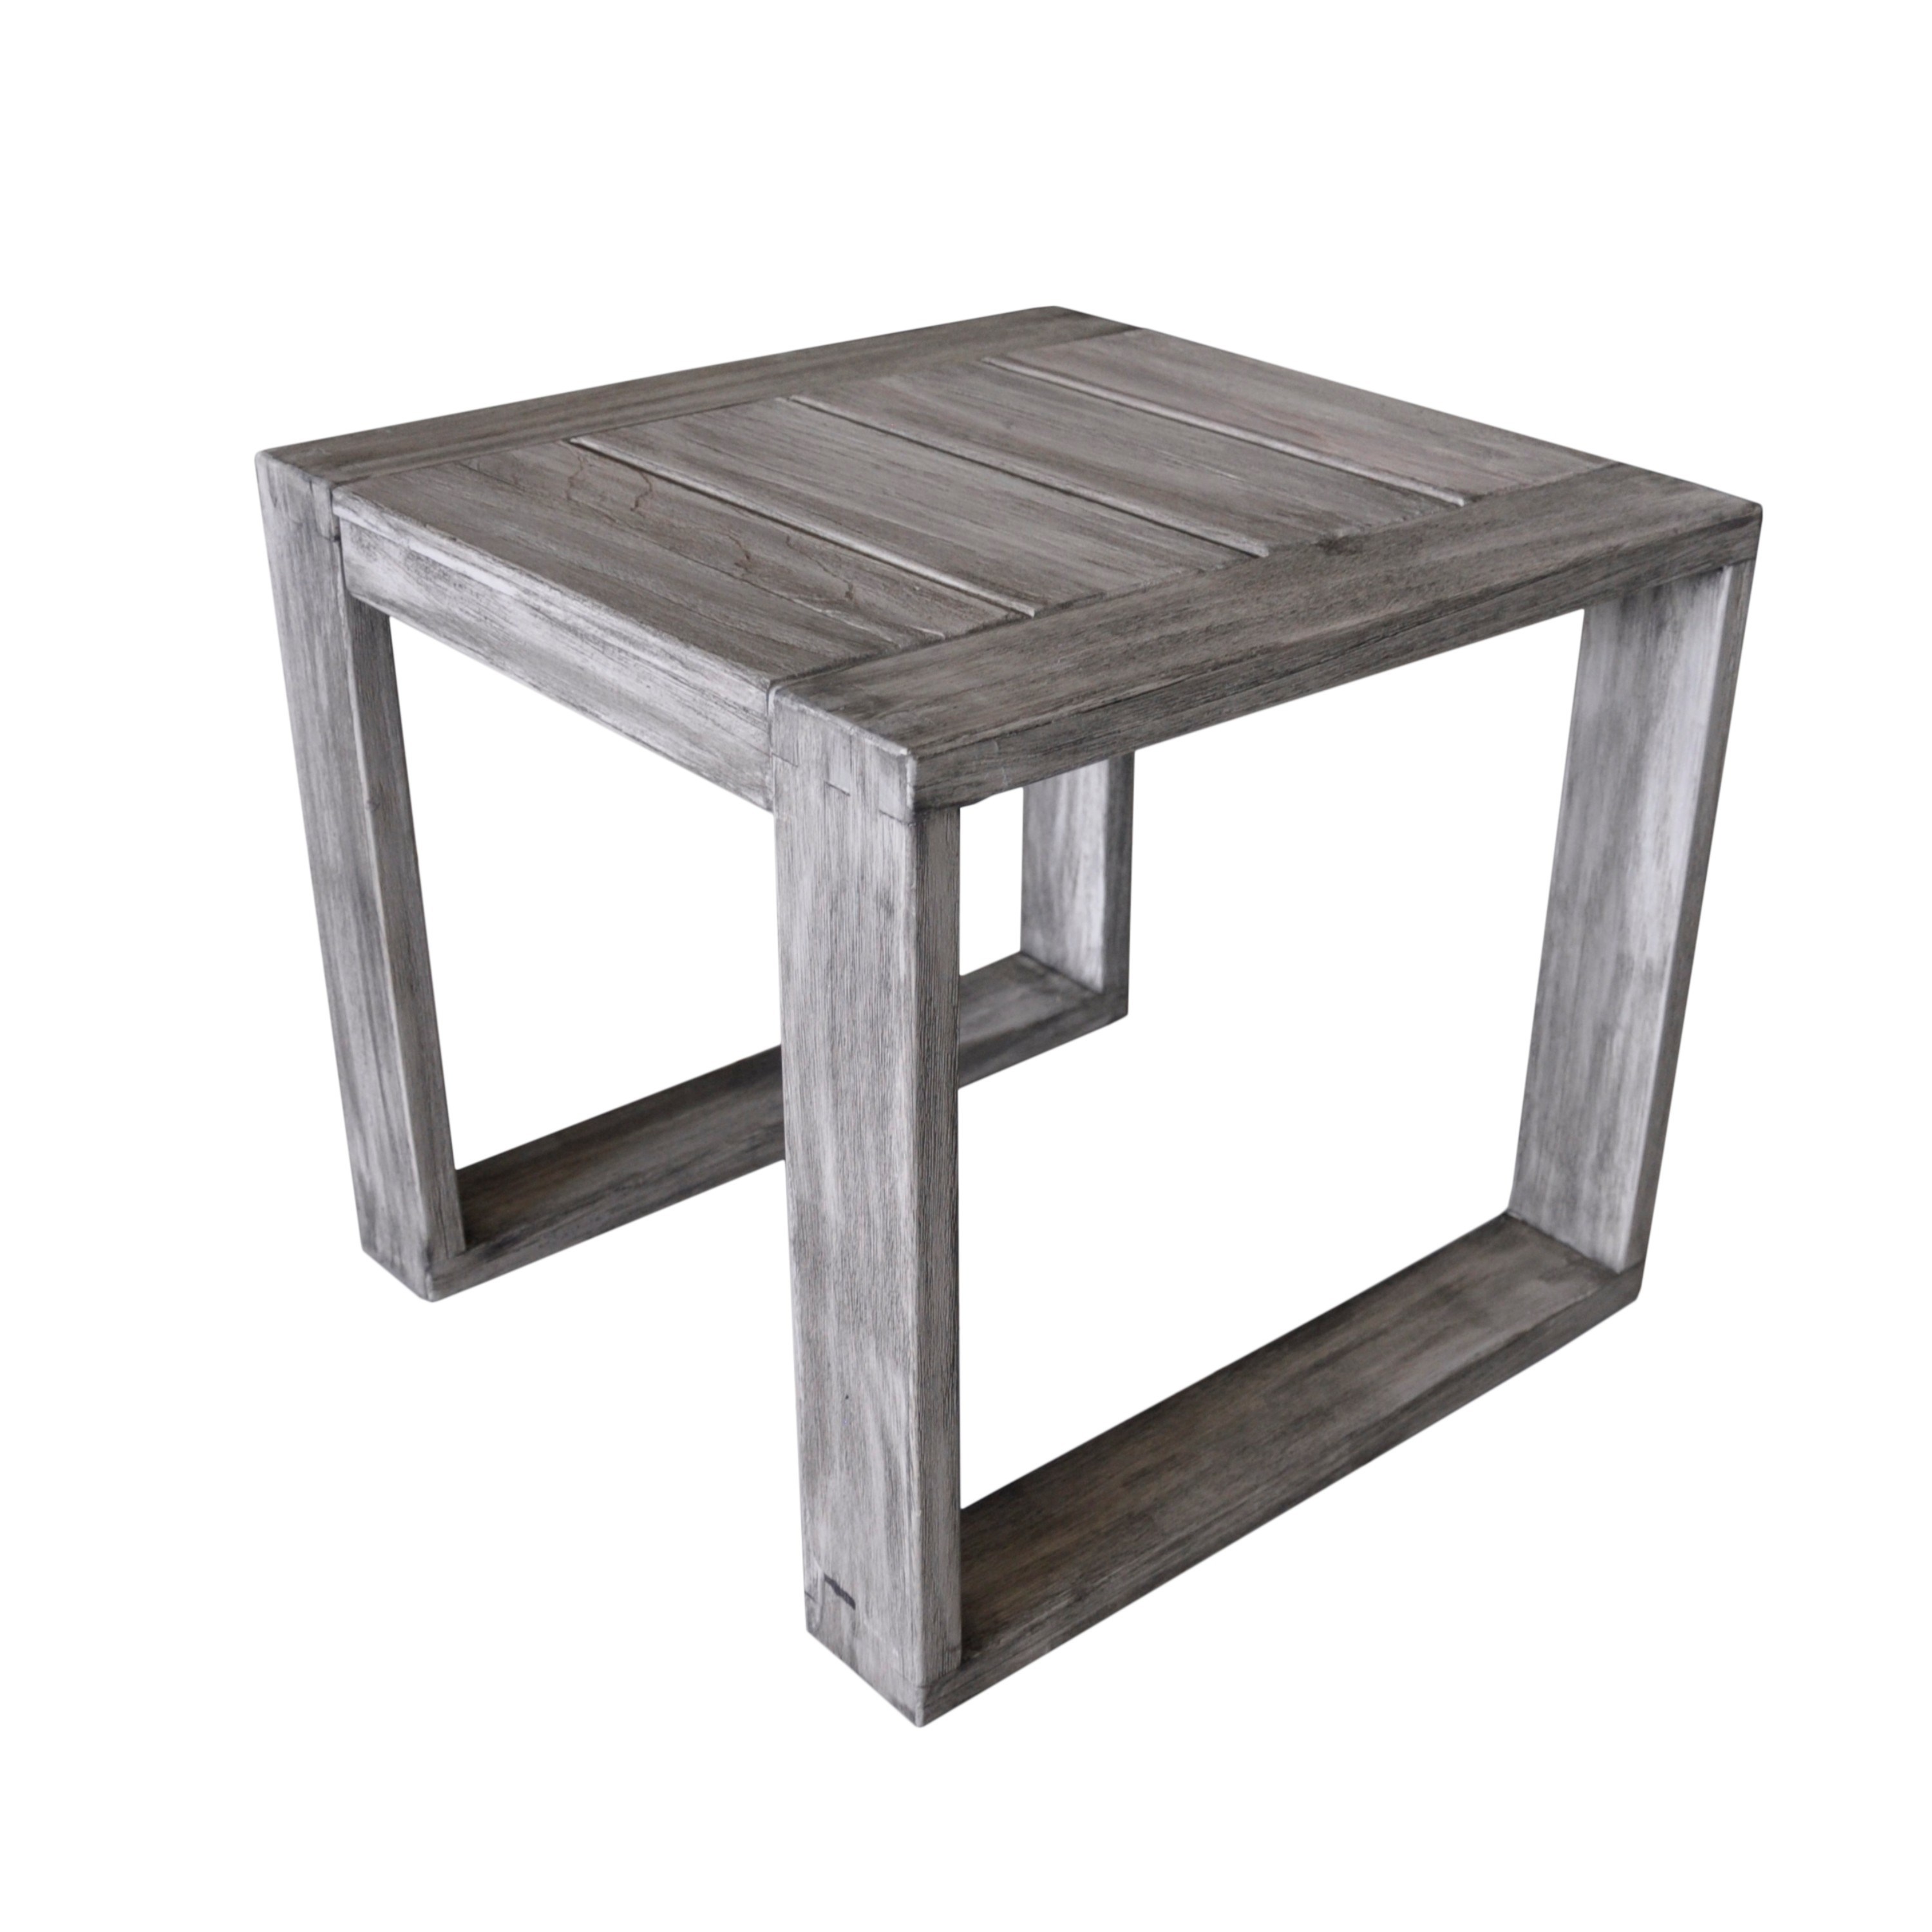 havenside home mamaroneck grey teak outdoor side table free courtyard casual driftwood gray north shore shipping today art deco desk colorful lamps square tables living room round